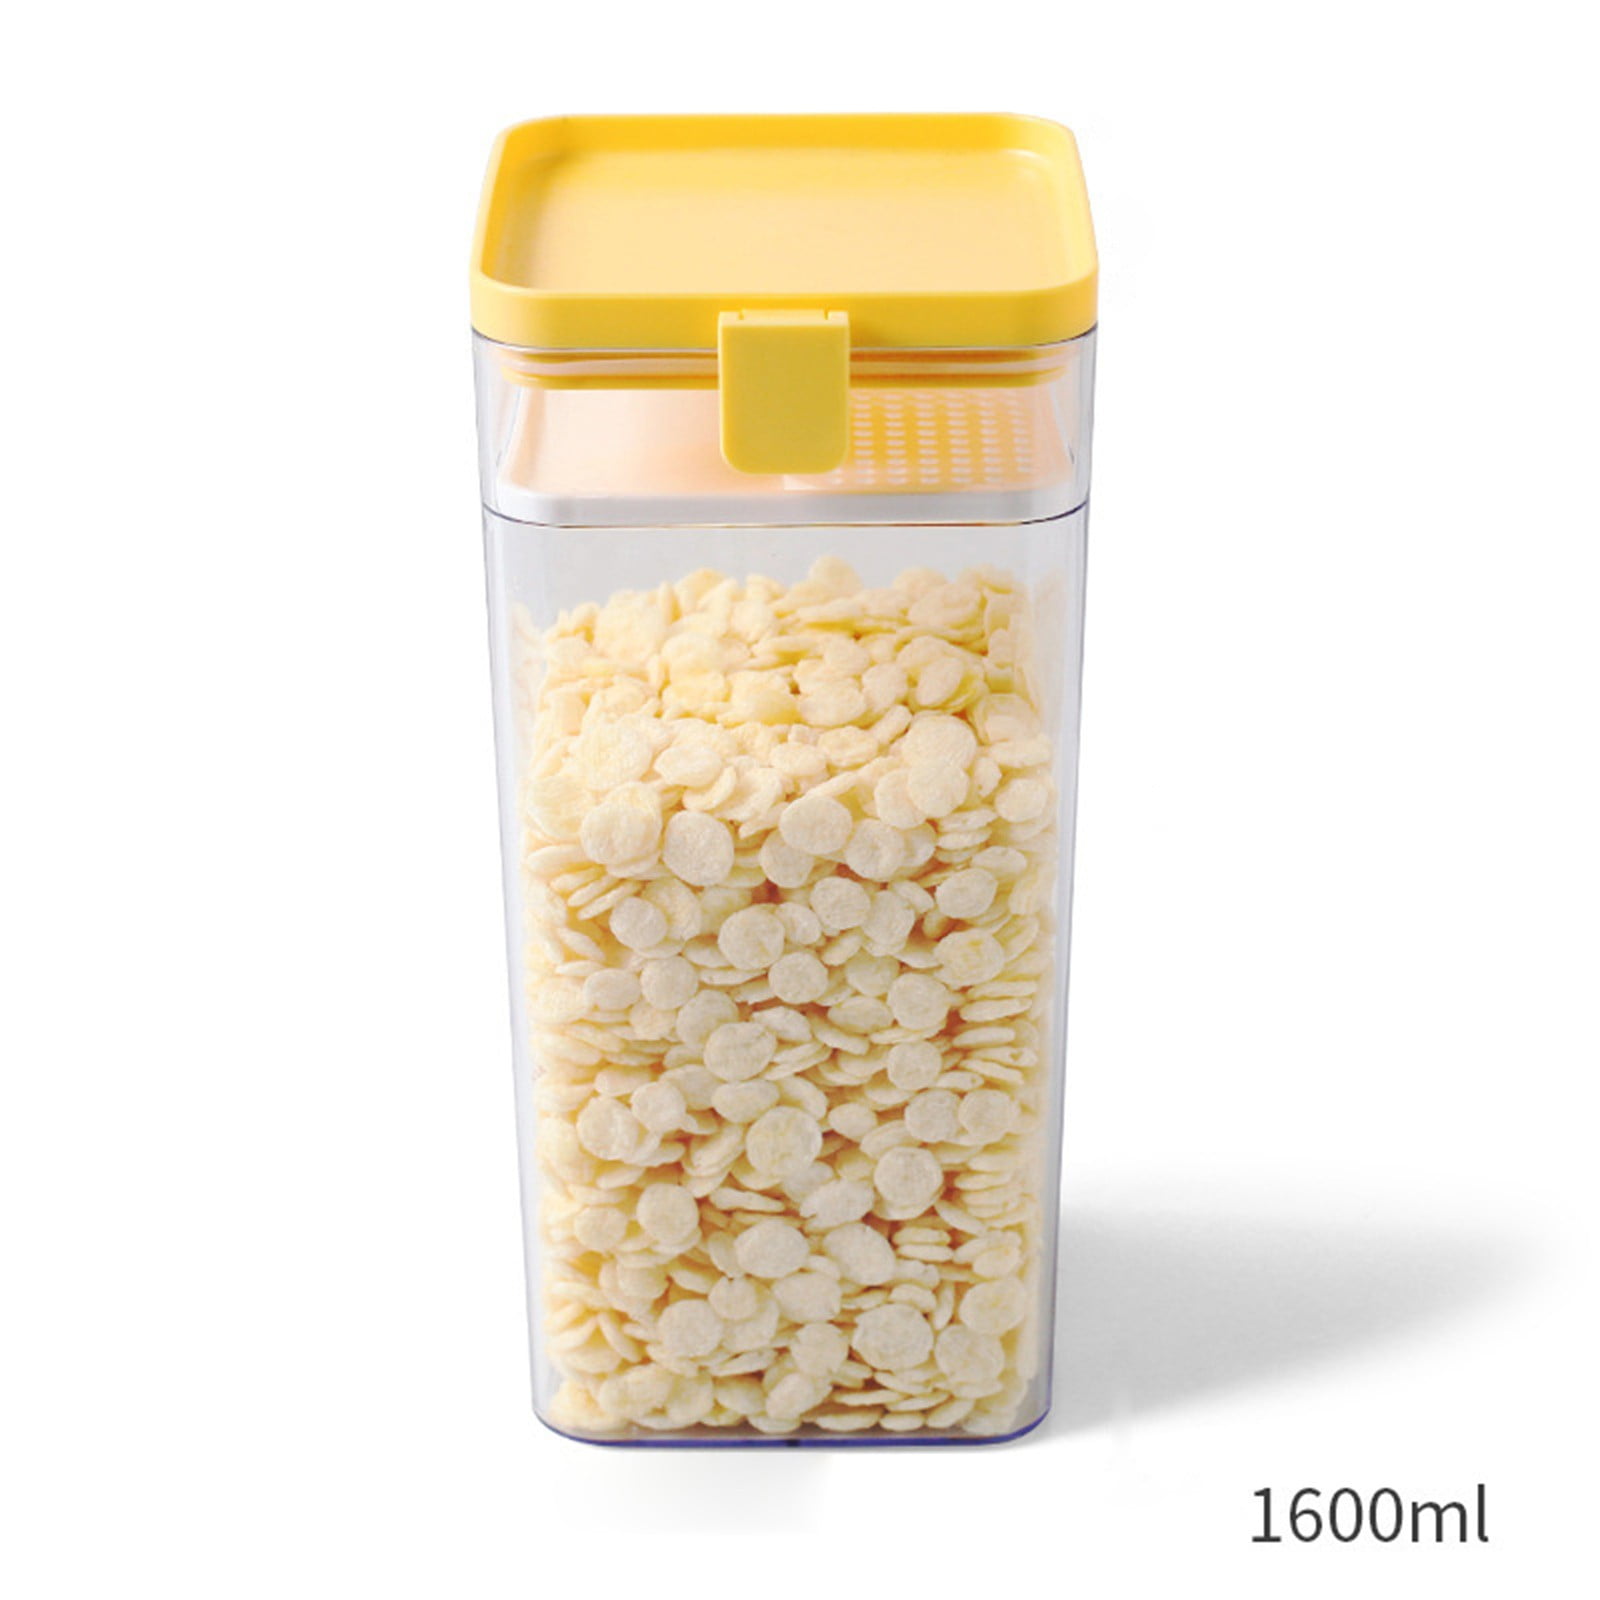 Details about   Plastic Storage Containers w/Lids Set of 3 Snacks & More Sugar for Cereal 